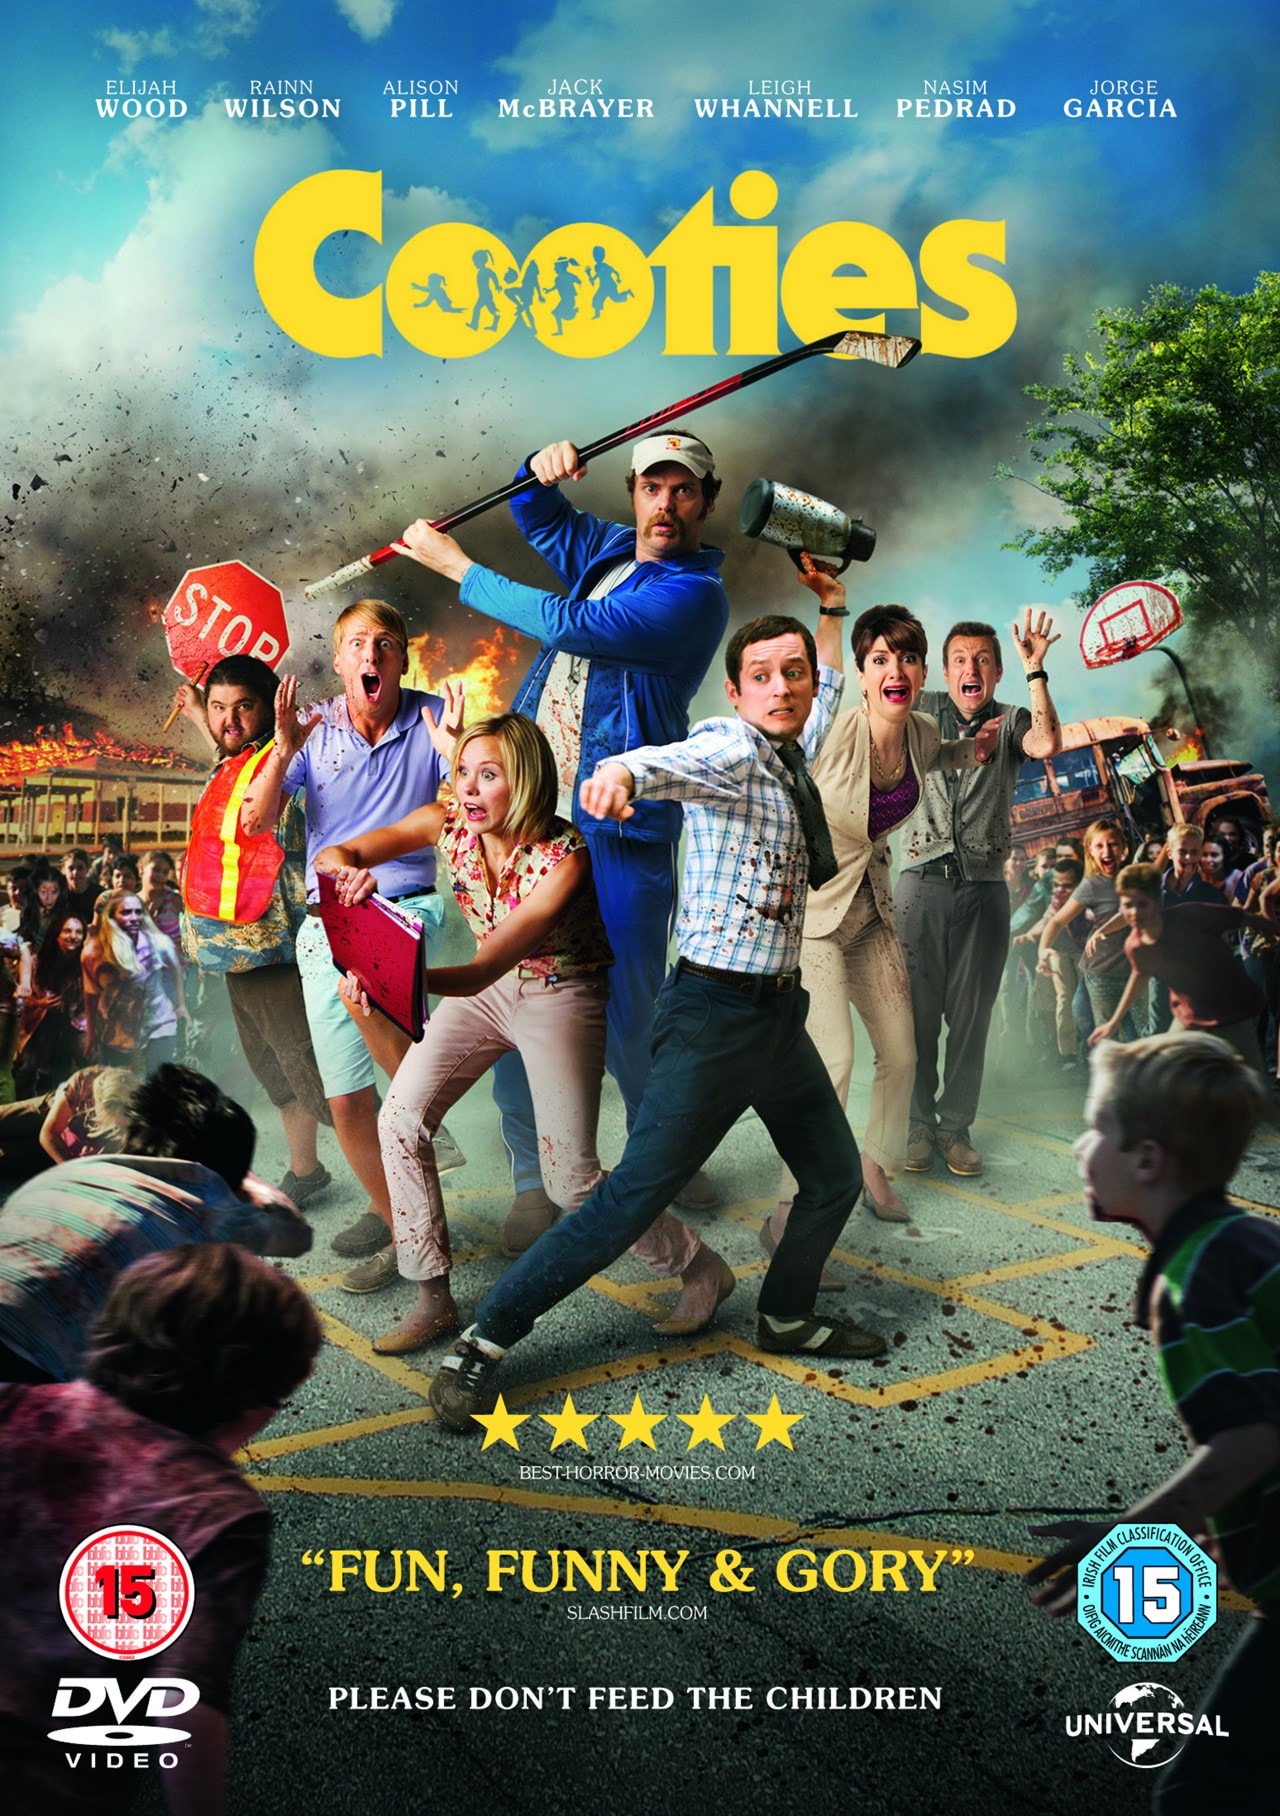 Cooties | DVD | Free shipping over £20 | HMV Store